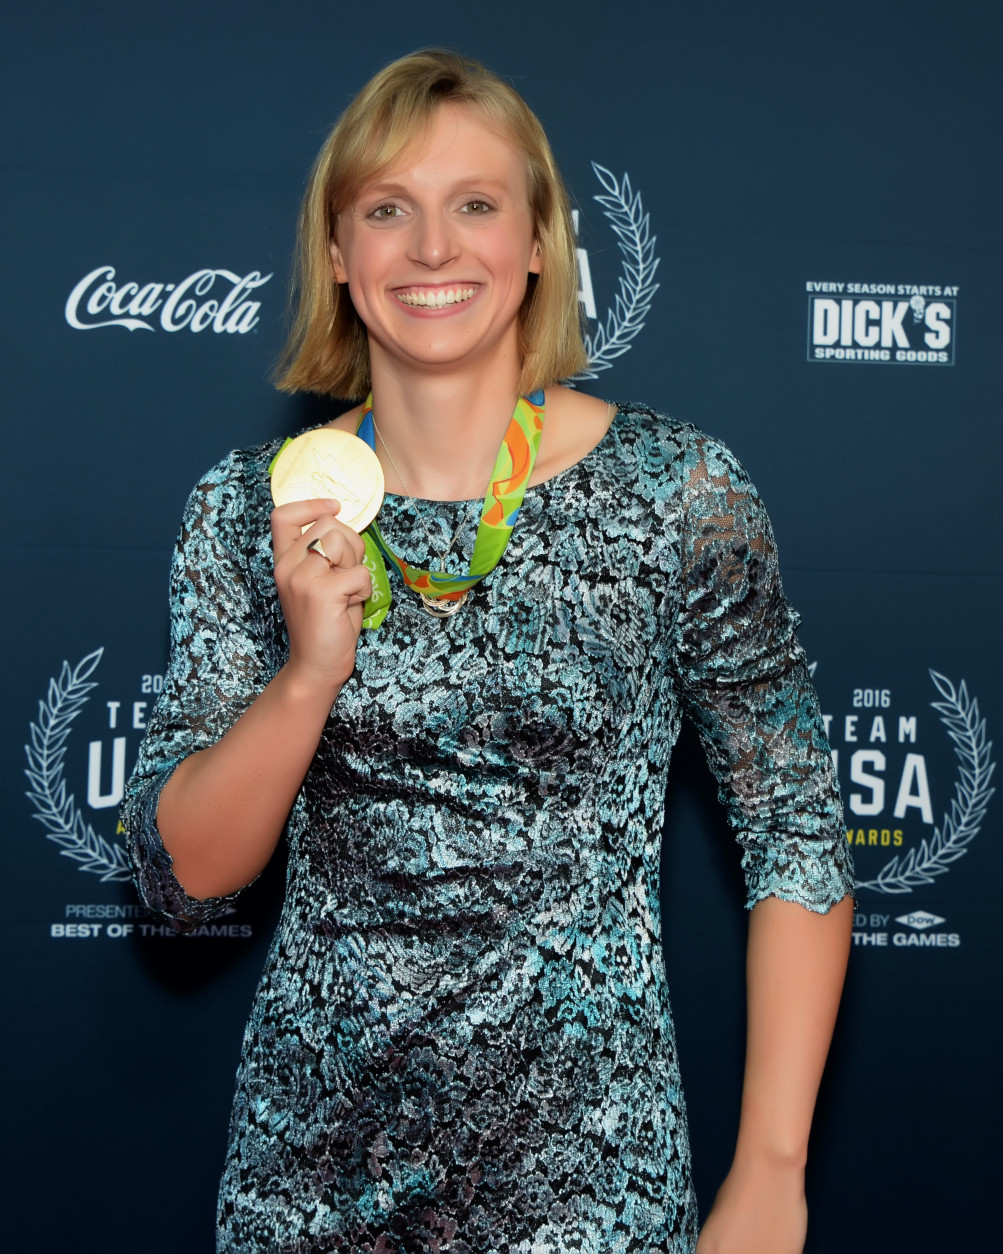 Katie Ledecky poses with one of her gold medals on the red carpet of the Team USA Awards. (Courtesy Shannon Finney, <a href="http://www.shannonfinneyphotography.com">www.shannonfinneyphotography.com</a>)